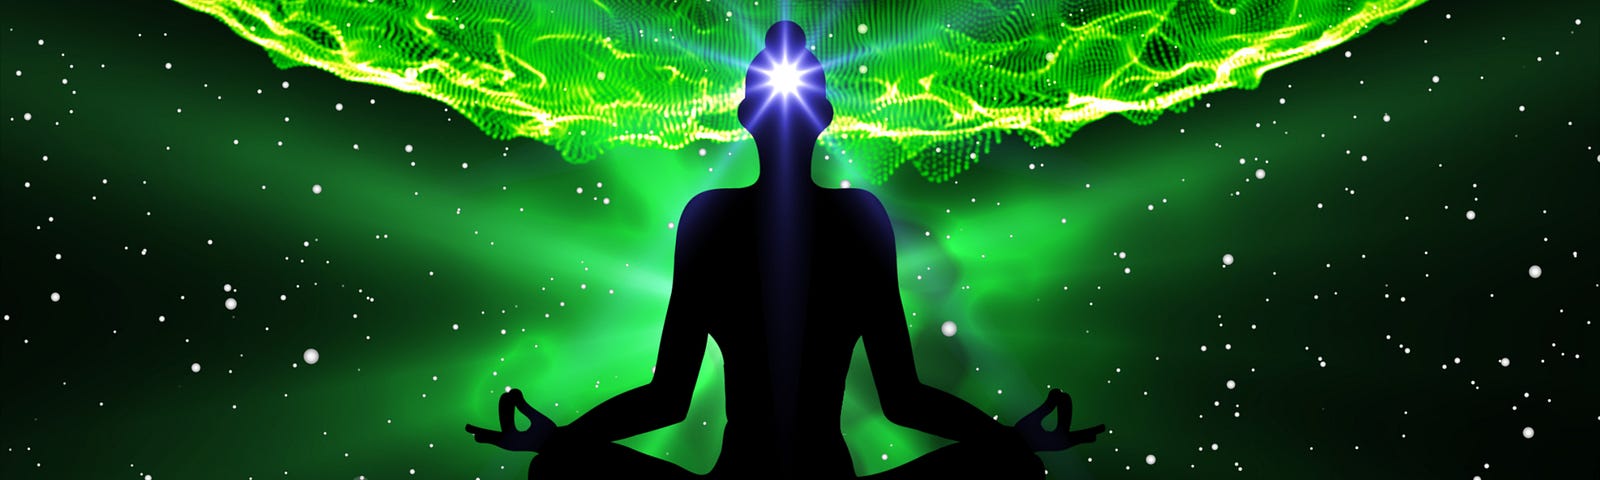 A person sits in the lotus position in an outer space themed background. The person’s third eye chakra is lit up white with blue rays emanating while they sit above a planet highlighted in green. They are ascending spiritually.